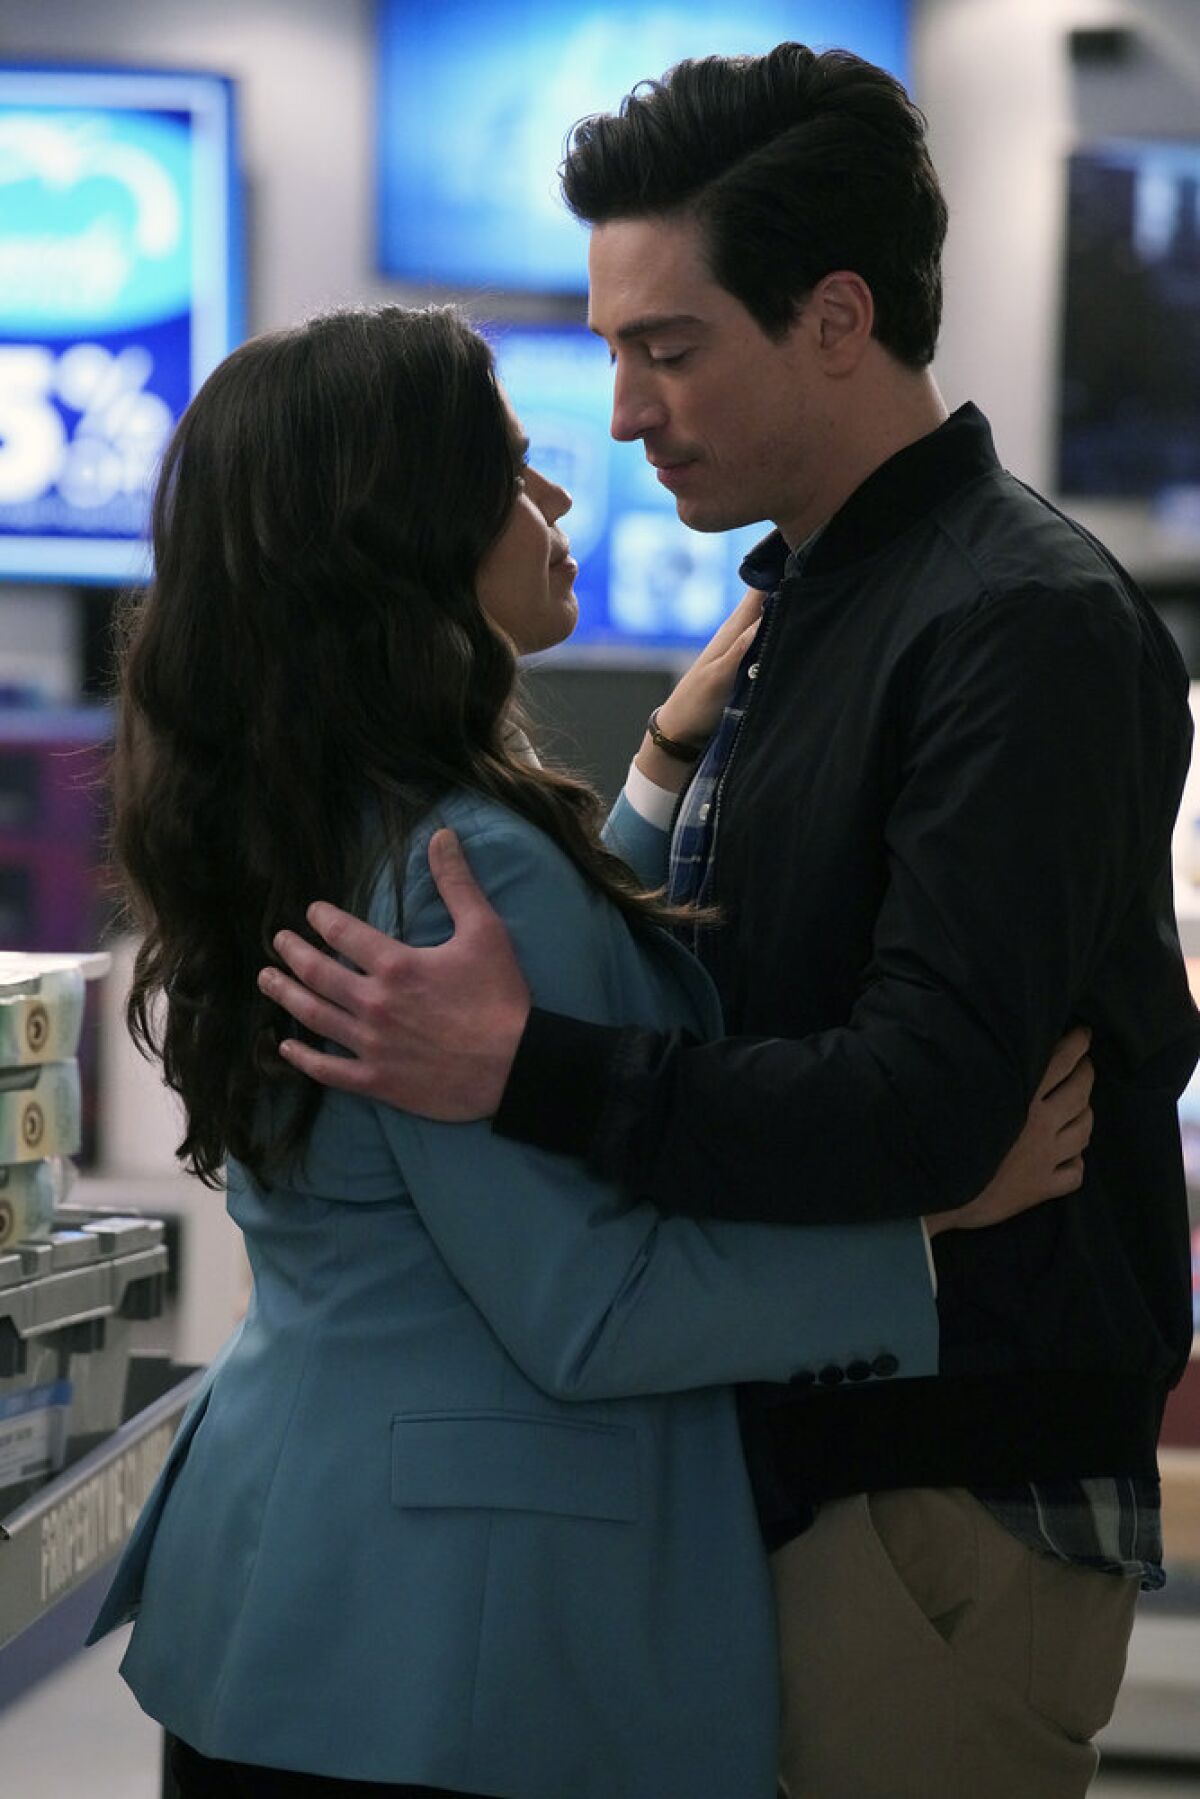 Amy (Ferrera) and Jonah (Feldman) embrace and look into each other's eyes on "Superstore."